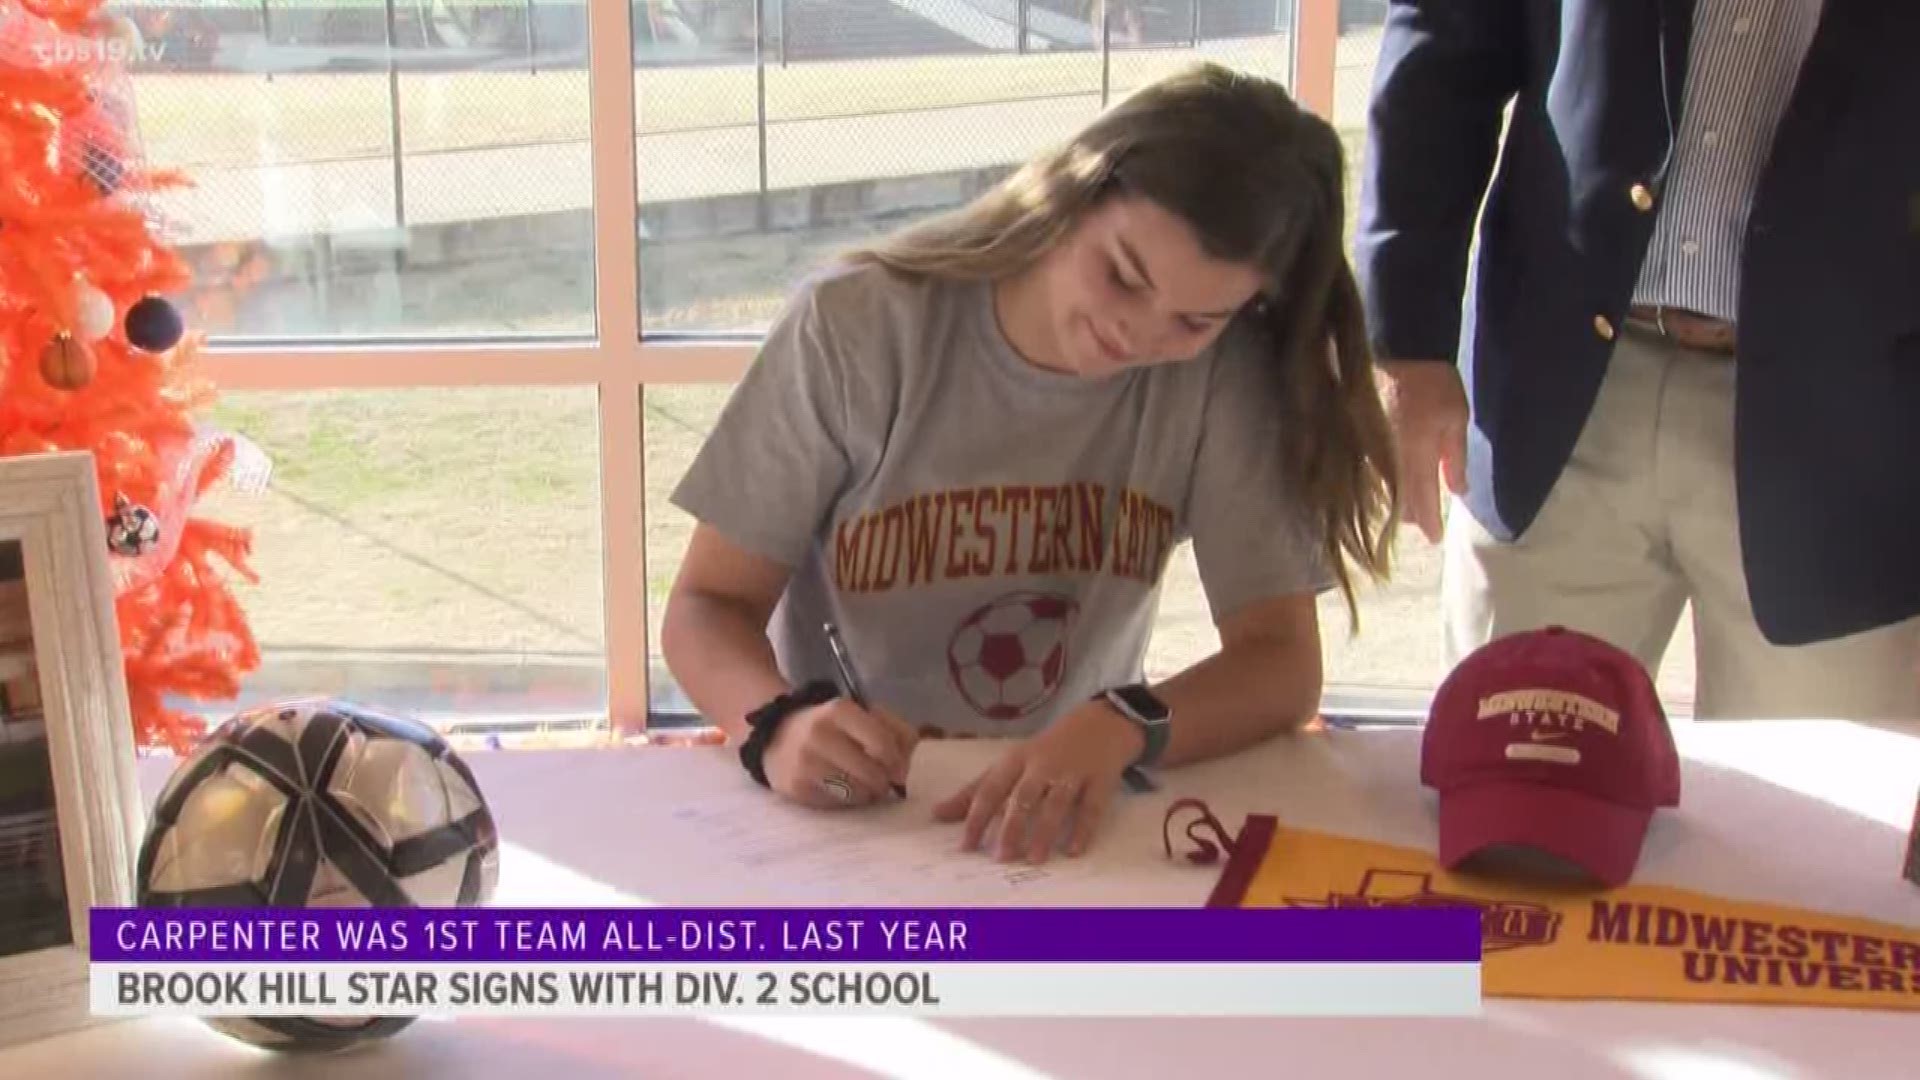 Brook Hill soccer star signs with D2 school